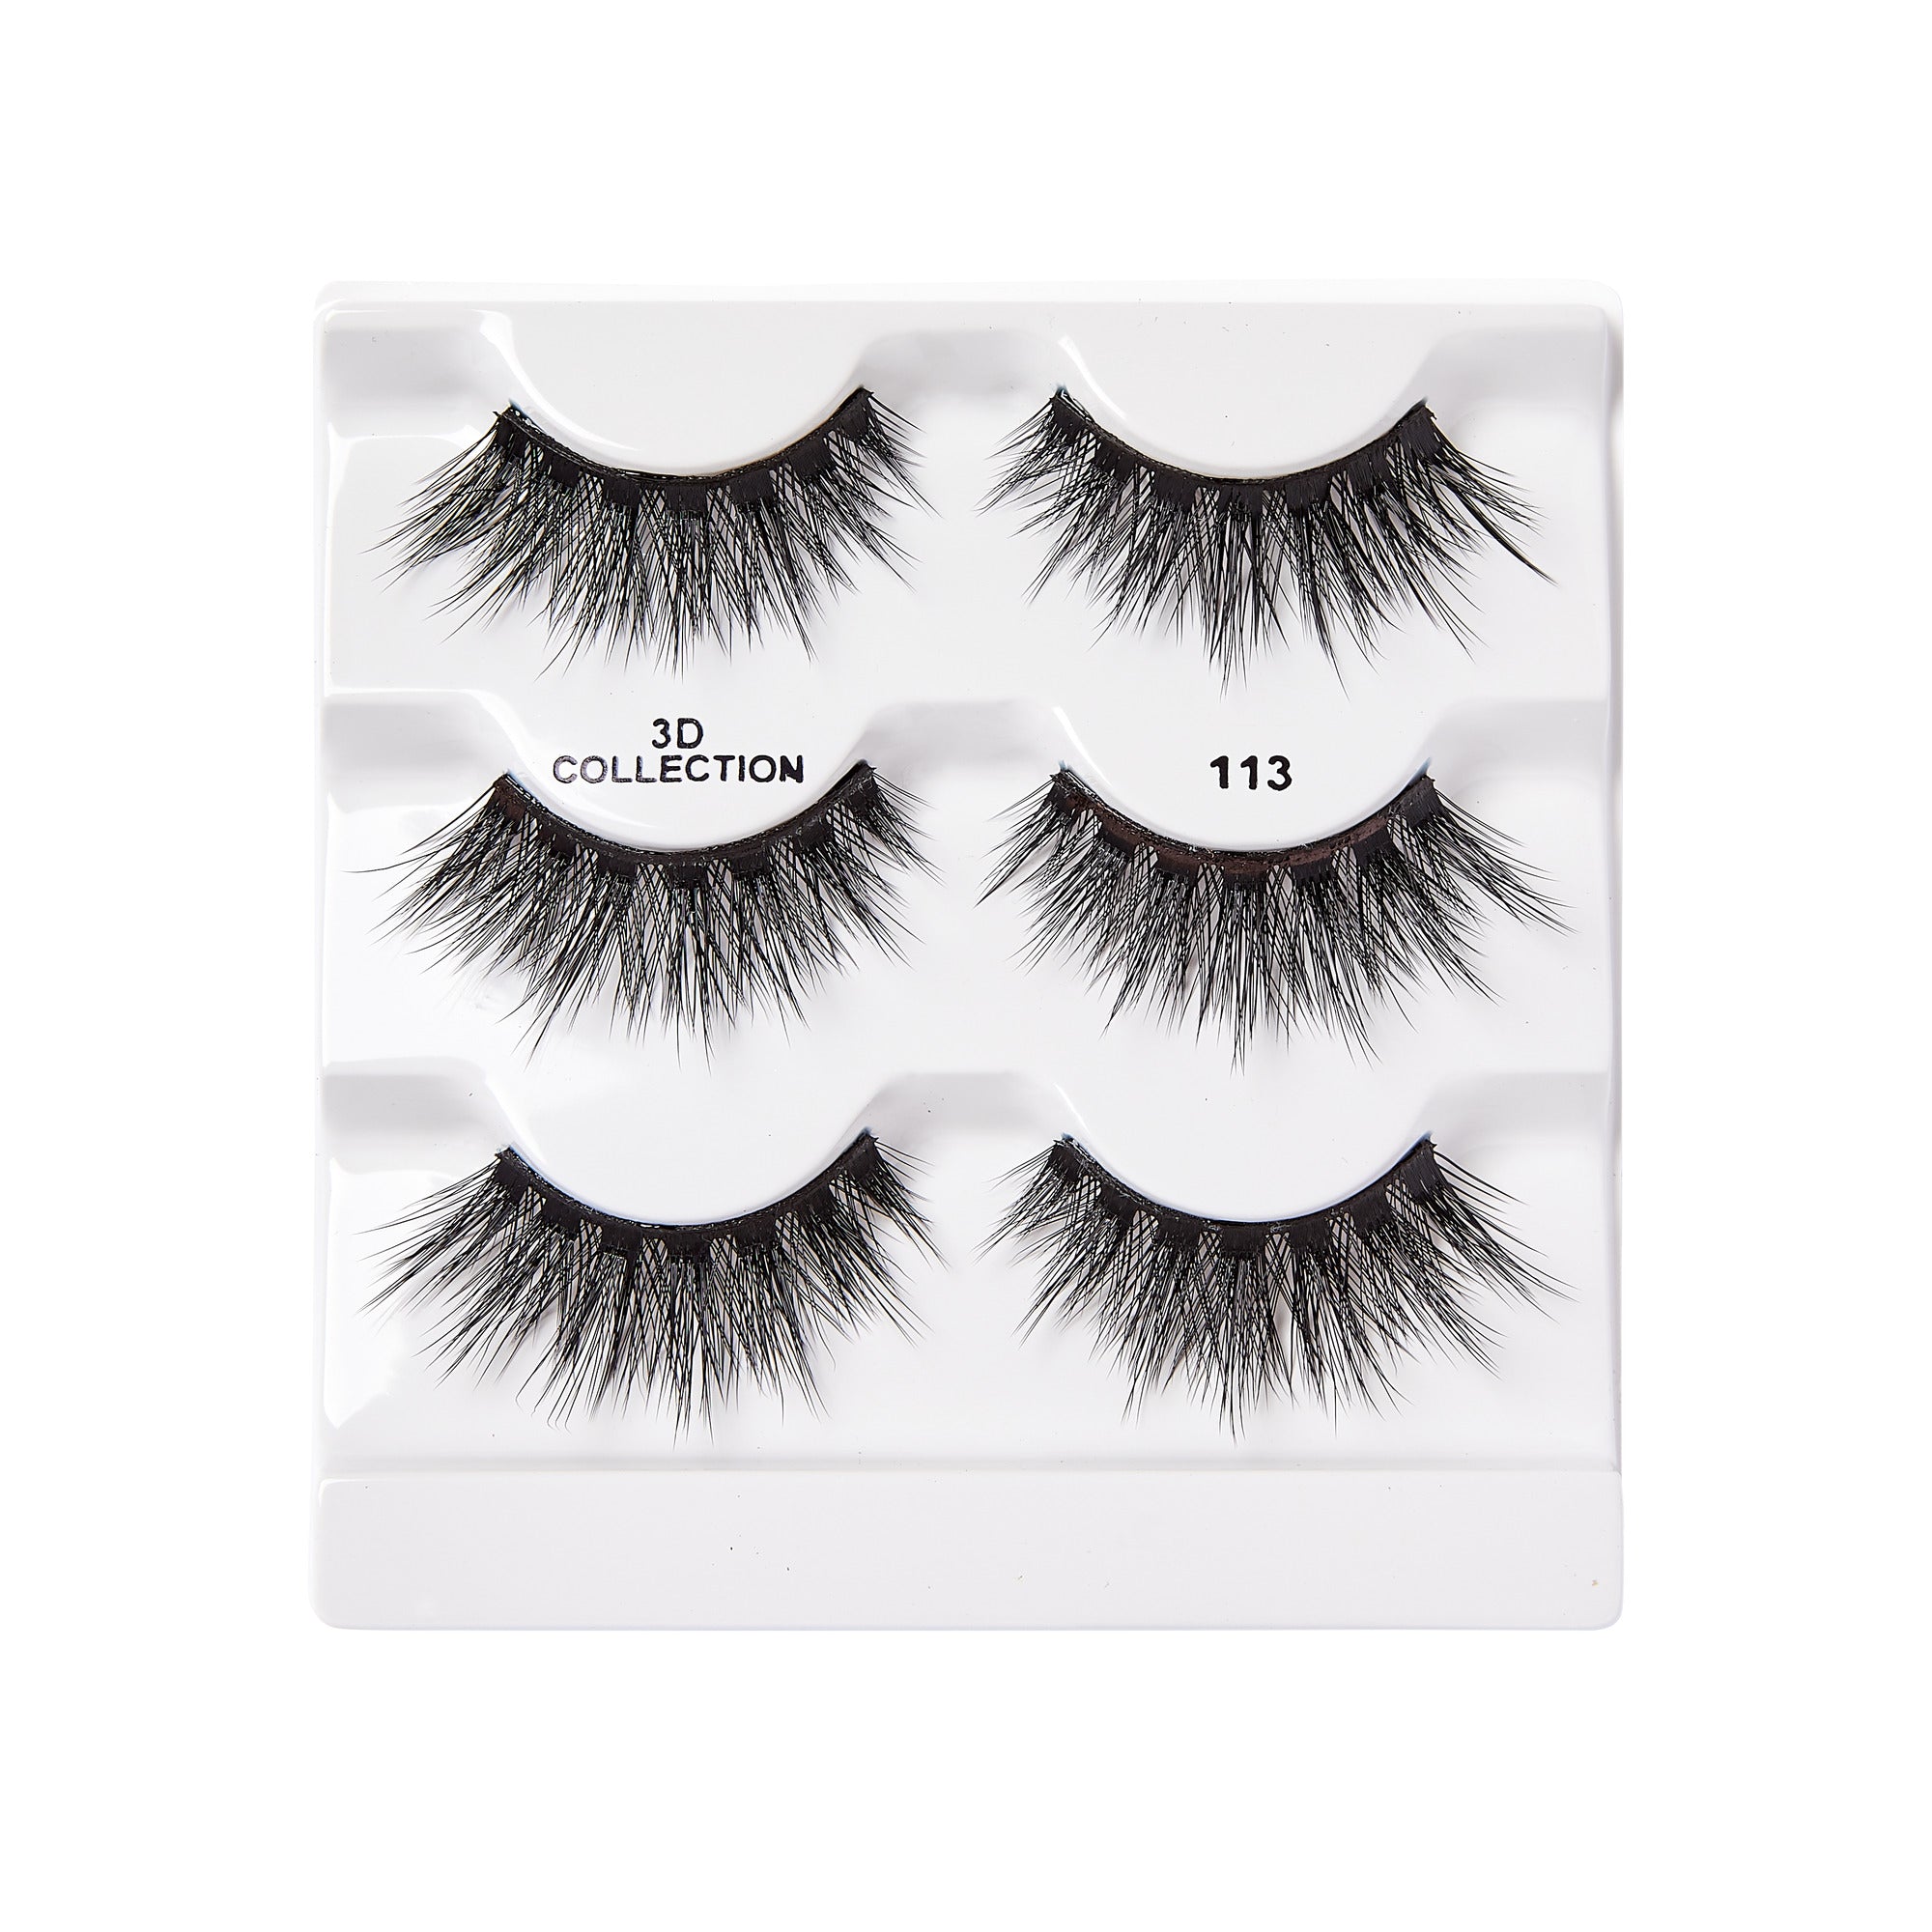 I.Envy By Kiss 3D Lashes Multi Pack Multiangle & Volume Collection-113 (KPEIM113)